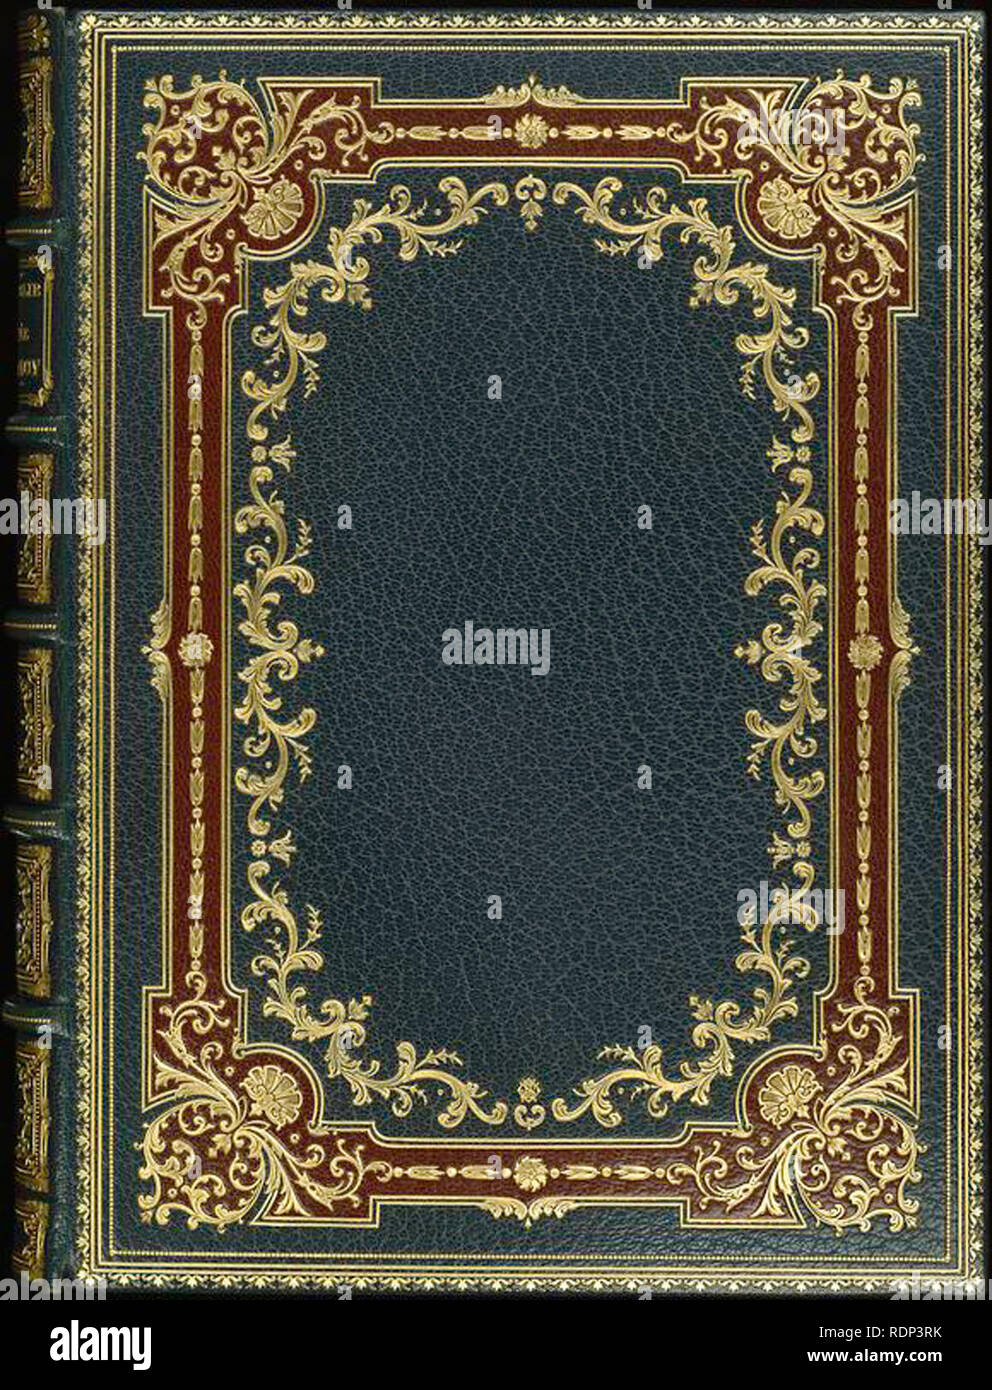 vintage book cover Stock Photo - Alamy